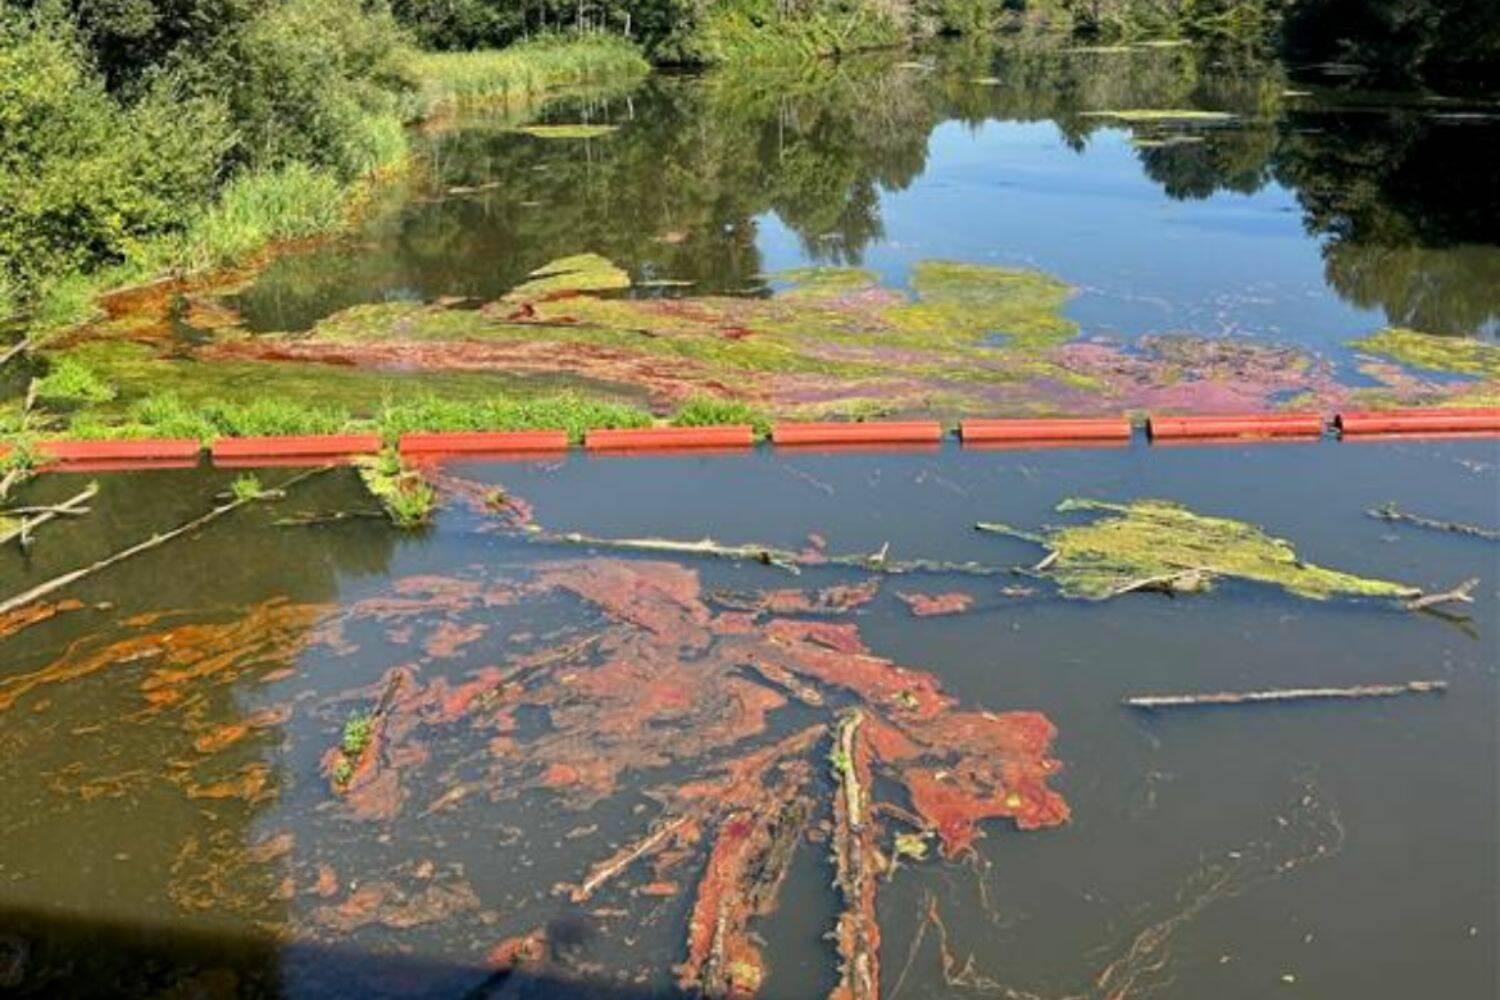 Cooking oil spill in the Black River wetland. (Screenshot from Dept. of Ecology twitter post)